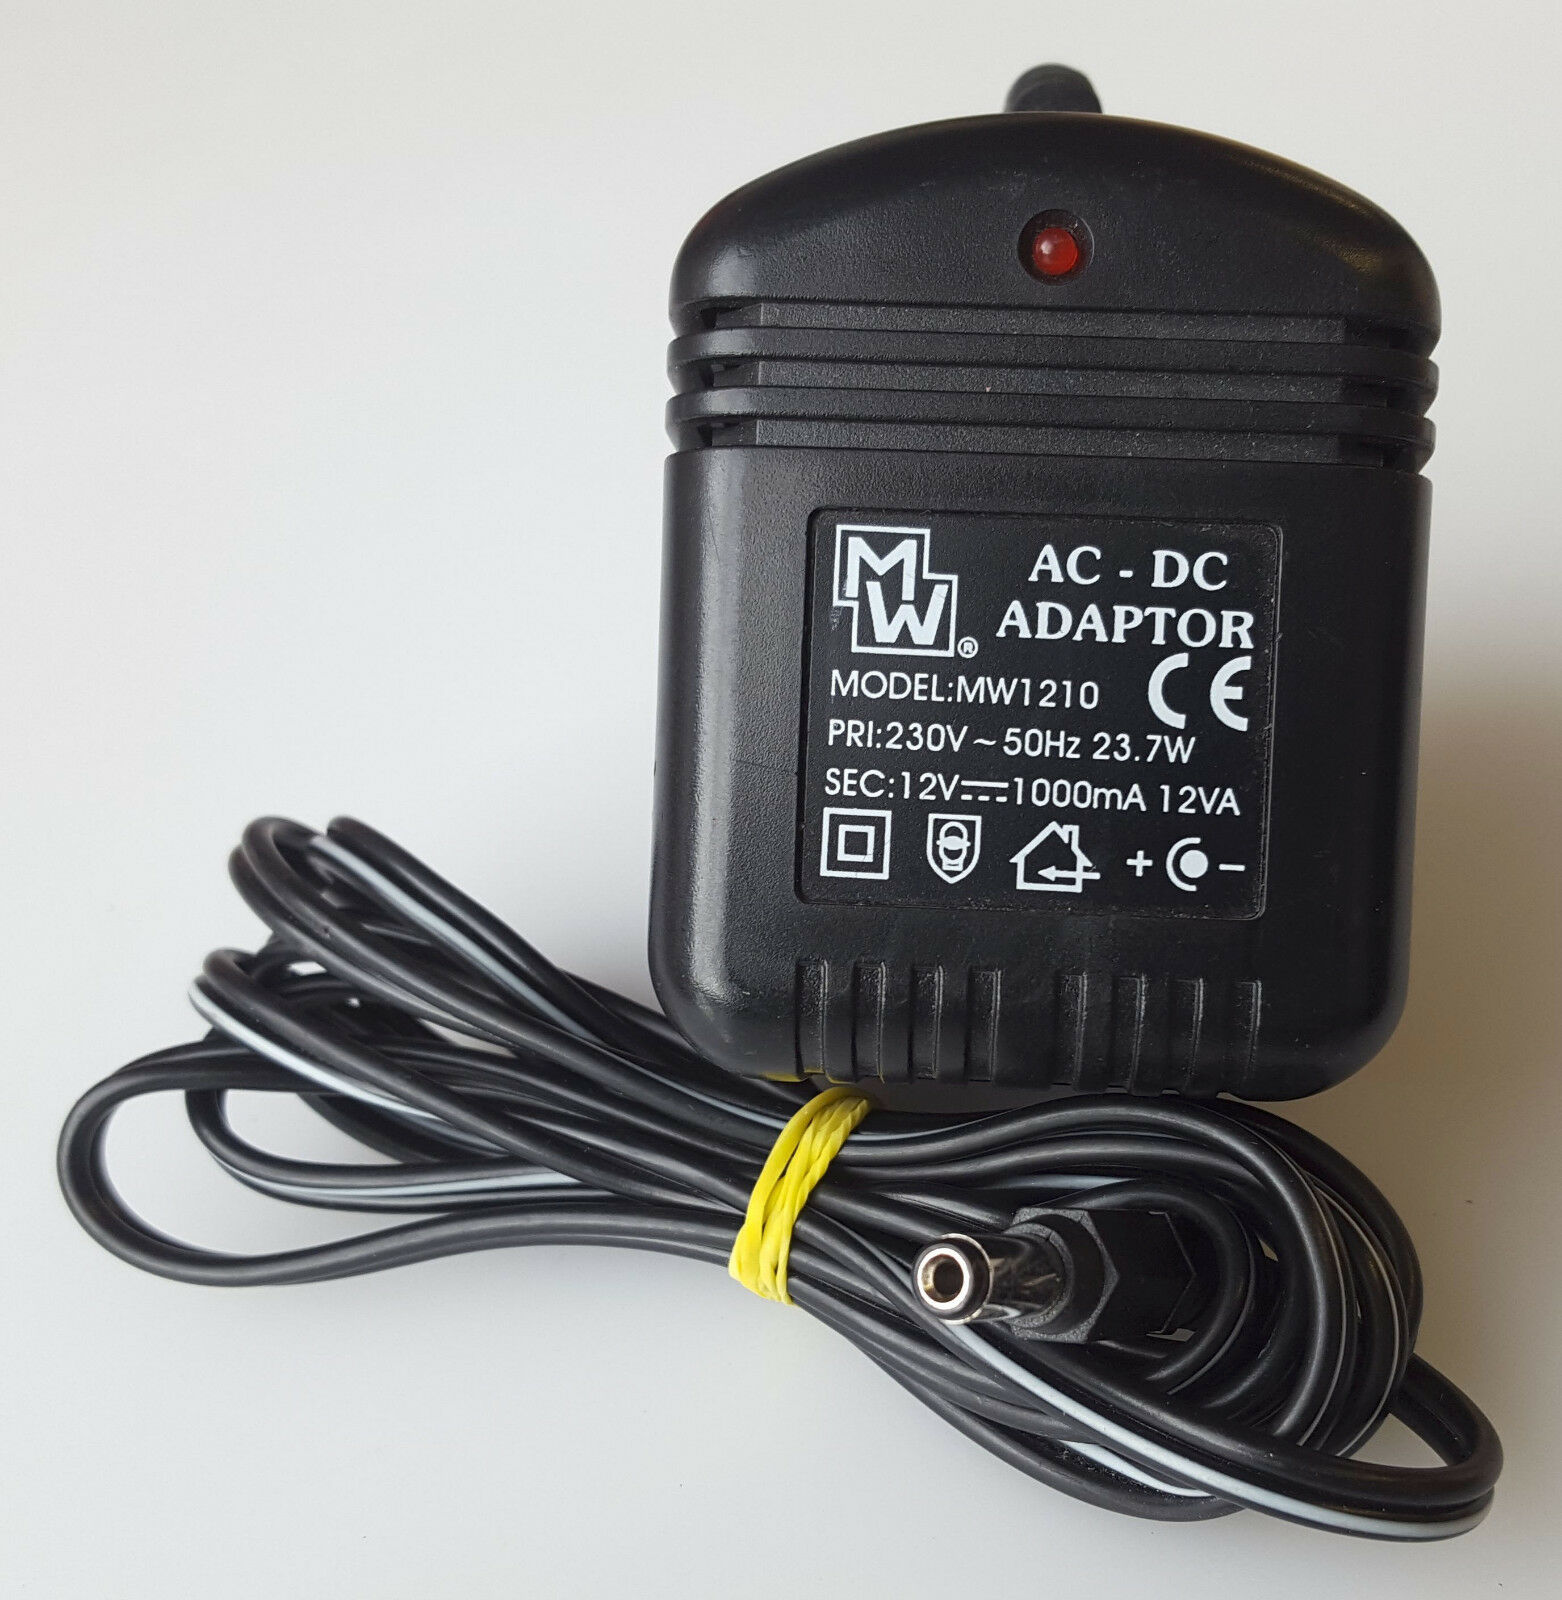 MW MW1210 AC/DC POWER SUPPLY ADAPTER 12V 1.0A UK PLUG Manufacturer warranty: 3 months MPN: MW1210 Output Voltage: - Click Image to Close